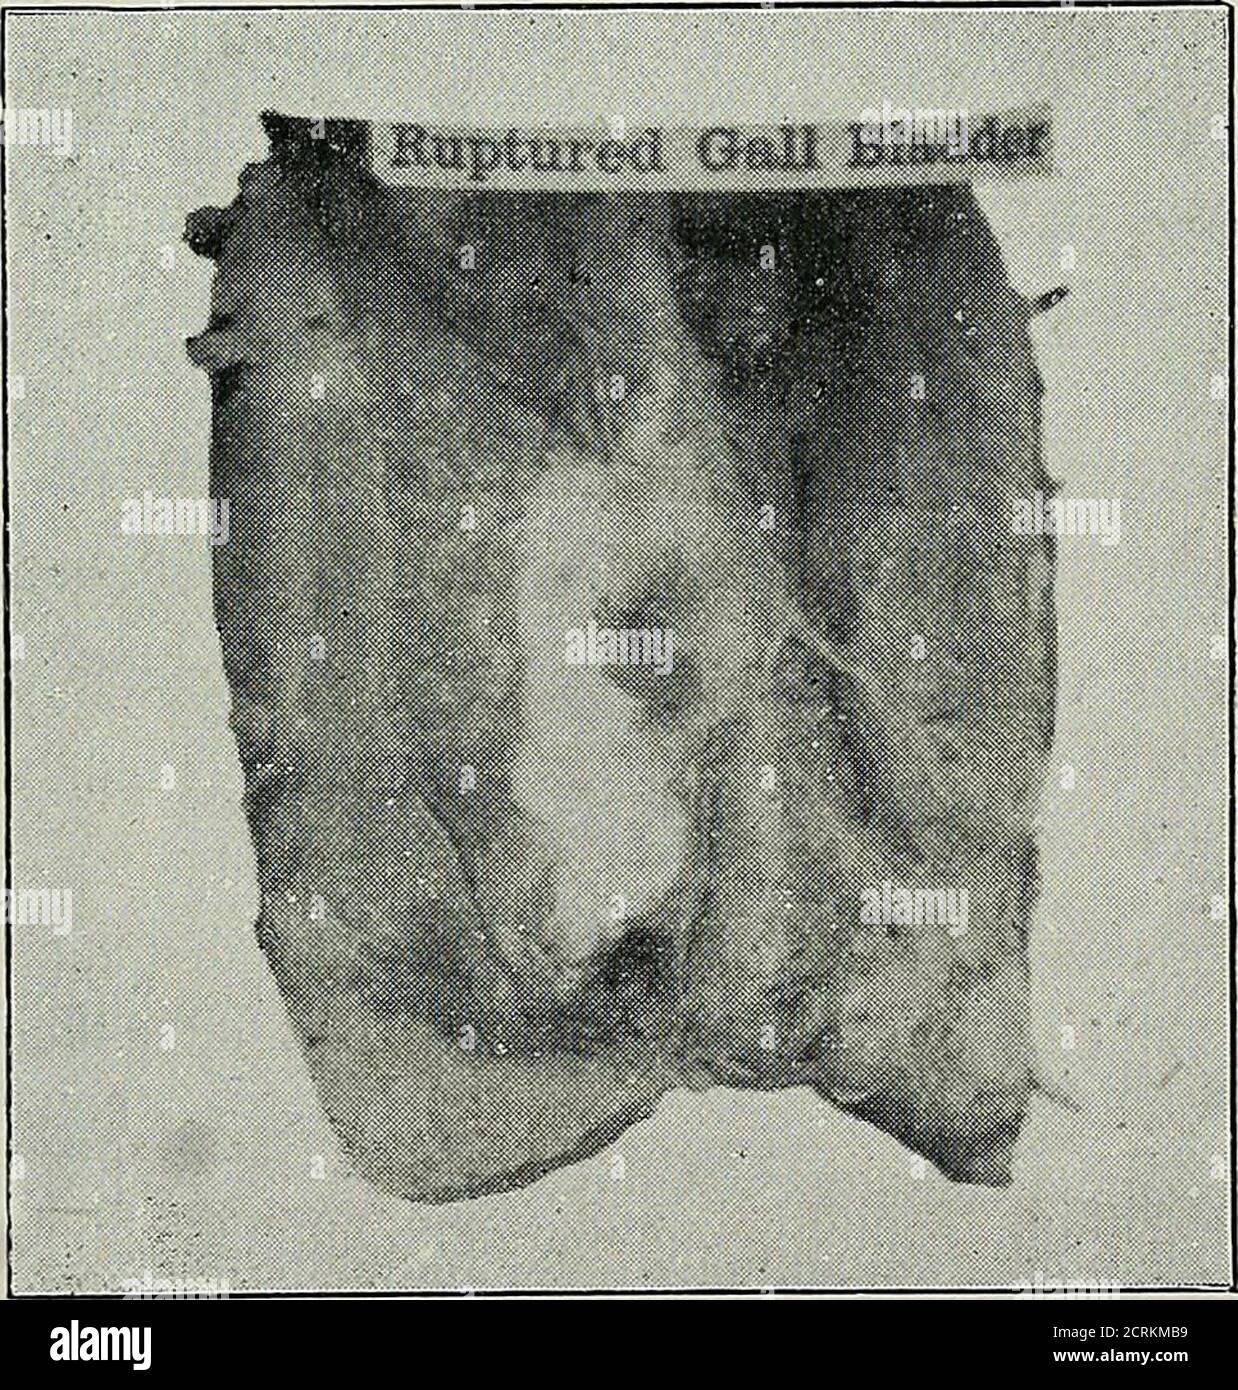 . Diseases of the gall-bladder and bile-ducts, including gall-stones . Fig. 18.(No. 2,267, St. Bartholomews Museum.). Fig. 19.—Rupture of Gall-bladder caused by a Fall, the Abdomenstriking.a Piece of Timber. Bile was extravasated, but the patient survived five weeks before death occurredfrom peritonitis. (No. 2,268, St. Bartholomews Museum.) jo DISEASES OF THE GALL-BLADDER AND BILE-DUCTS were distinct abdominal swelling, slight discoloration overthe region of the gall-bladder, and a temperature of ioi° F. ;there was no vomiting. On the 24th there was retention ofurine, and his bowels were move Stock Photo